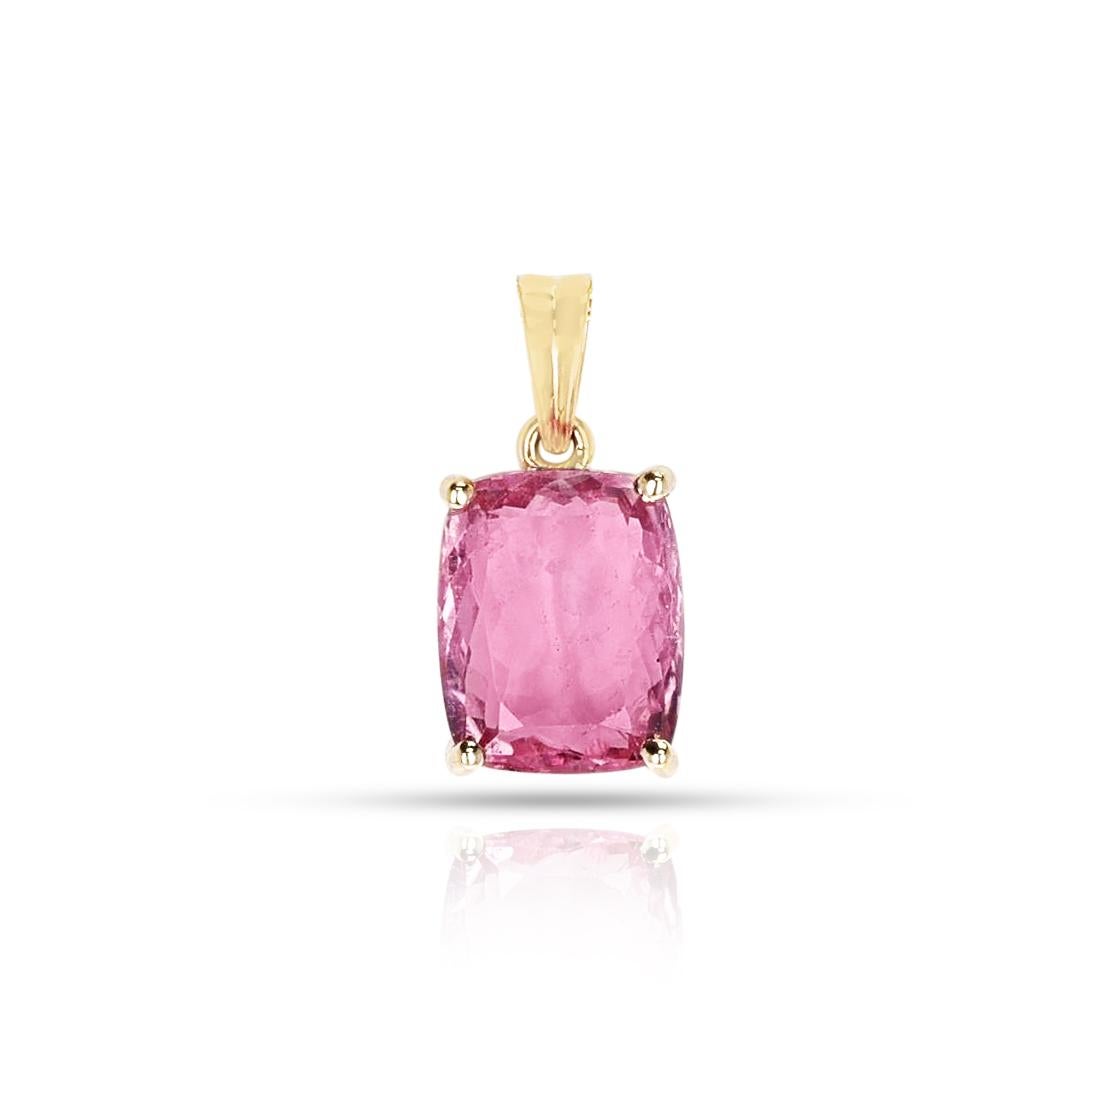 A Pink Tourmaline pendant weighing 5.14 cts. Total Weight: 2.6 Grams. Comes with 16